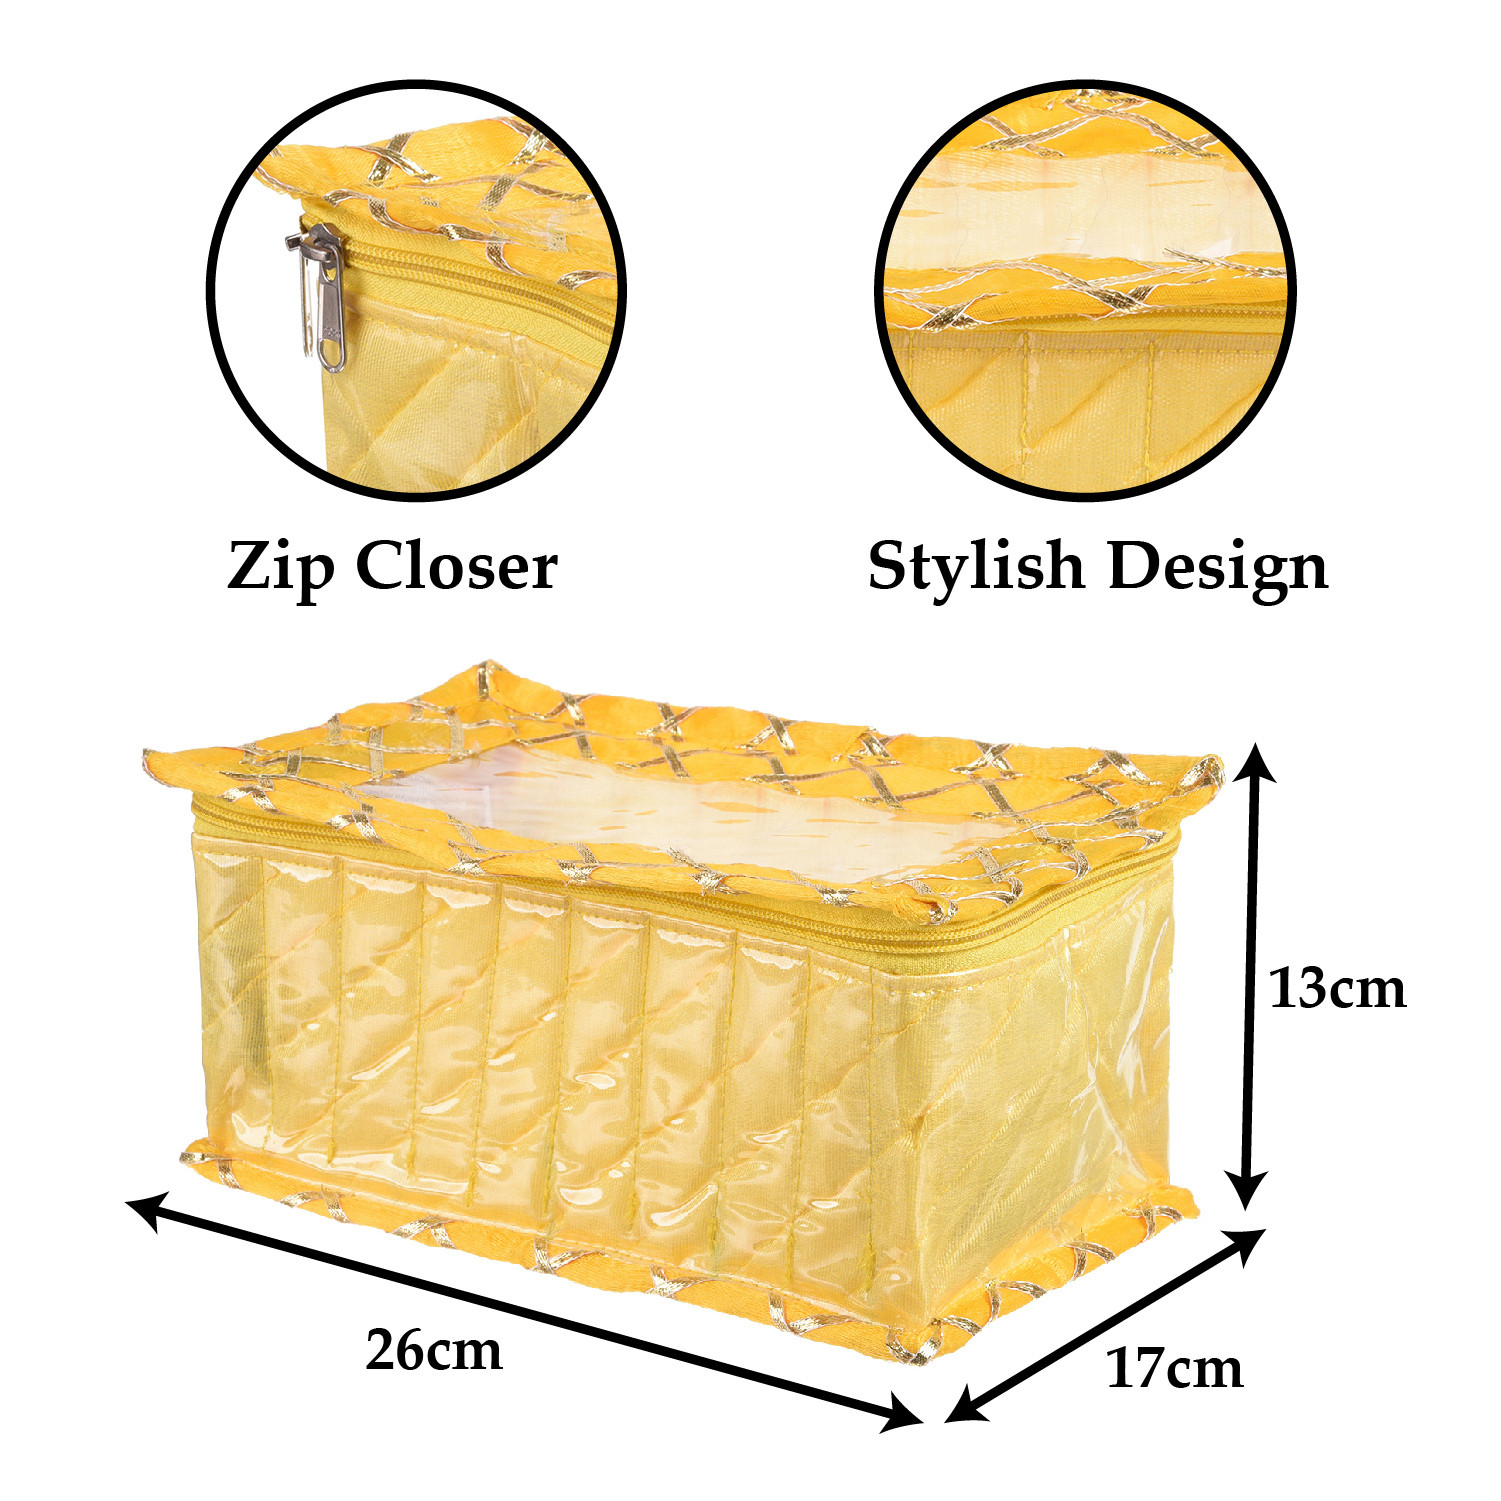 Kuber Industries Jewellery Box | PVC Laminated Gota Check Design Jewellery Kit For Woman | 10 Compartment & Pouches Cosmatic Bag with Transparent Top | Yellow